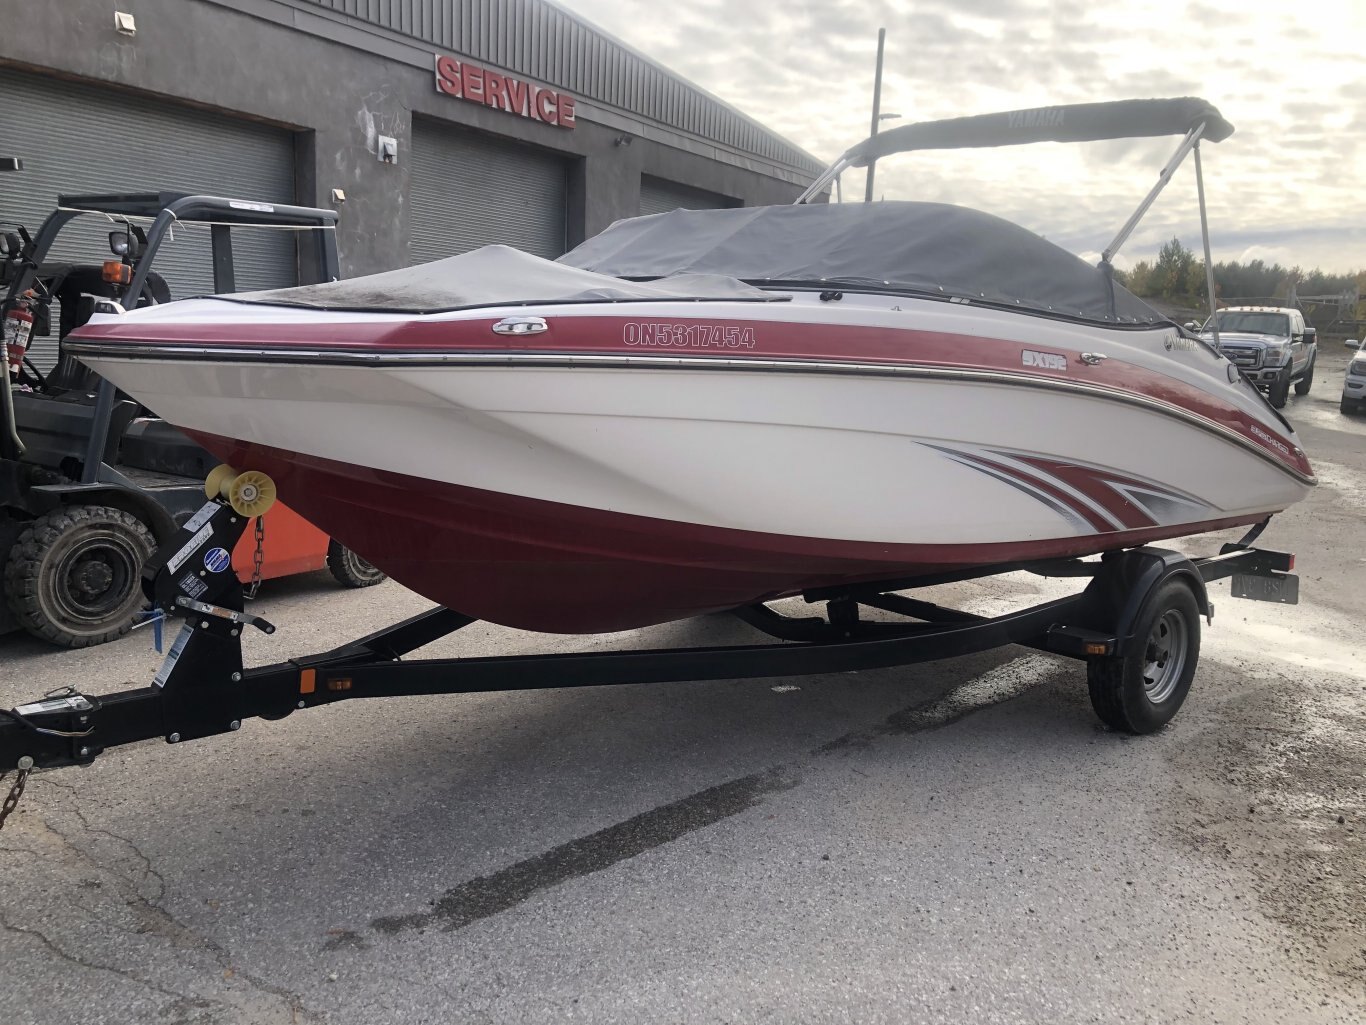 2016 YAMAHA SX192 Used! Great Find!